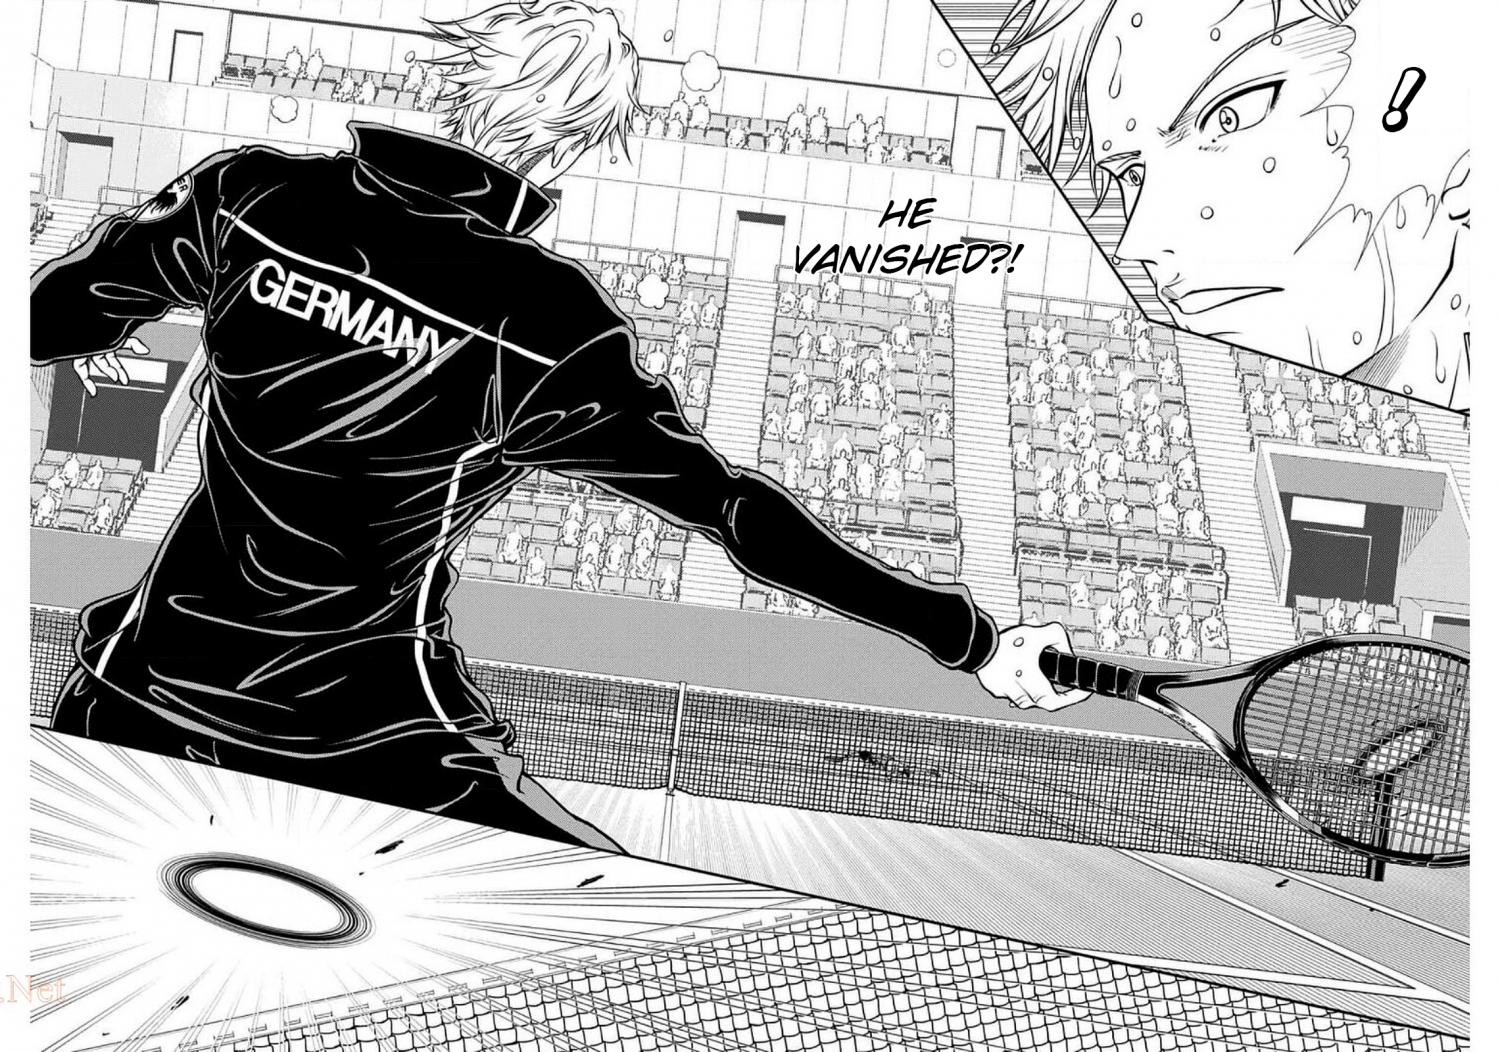 New Prince Of Tennis Chapter 333